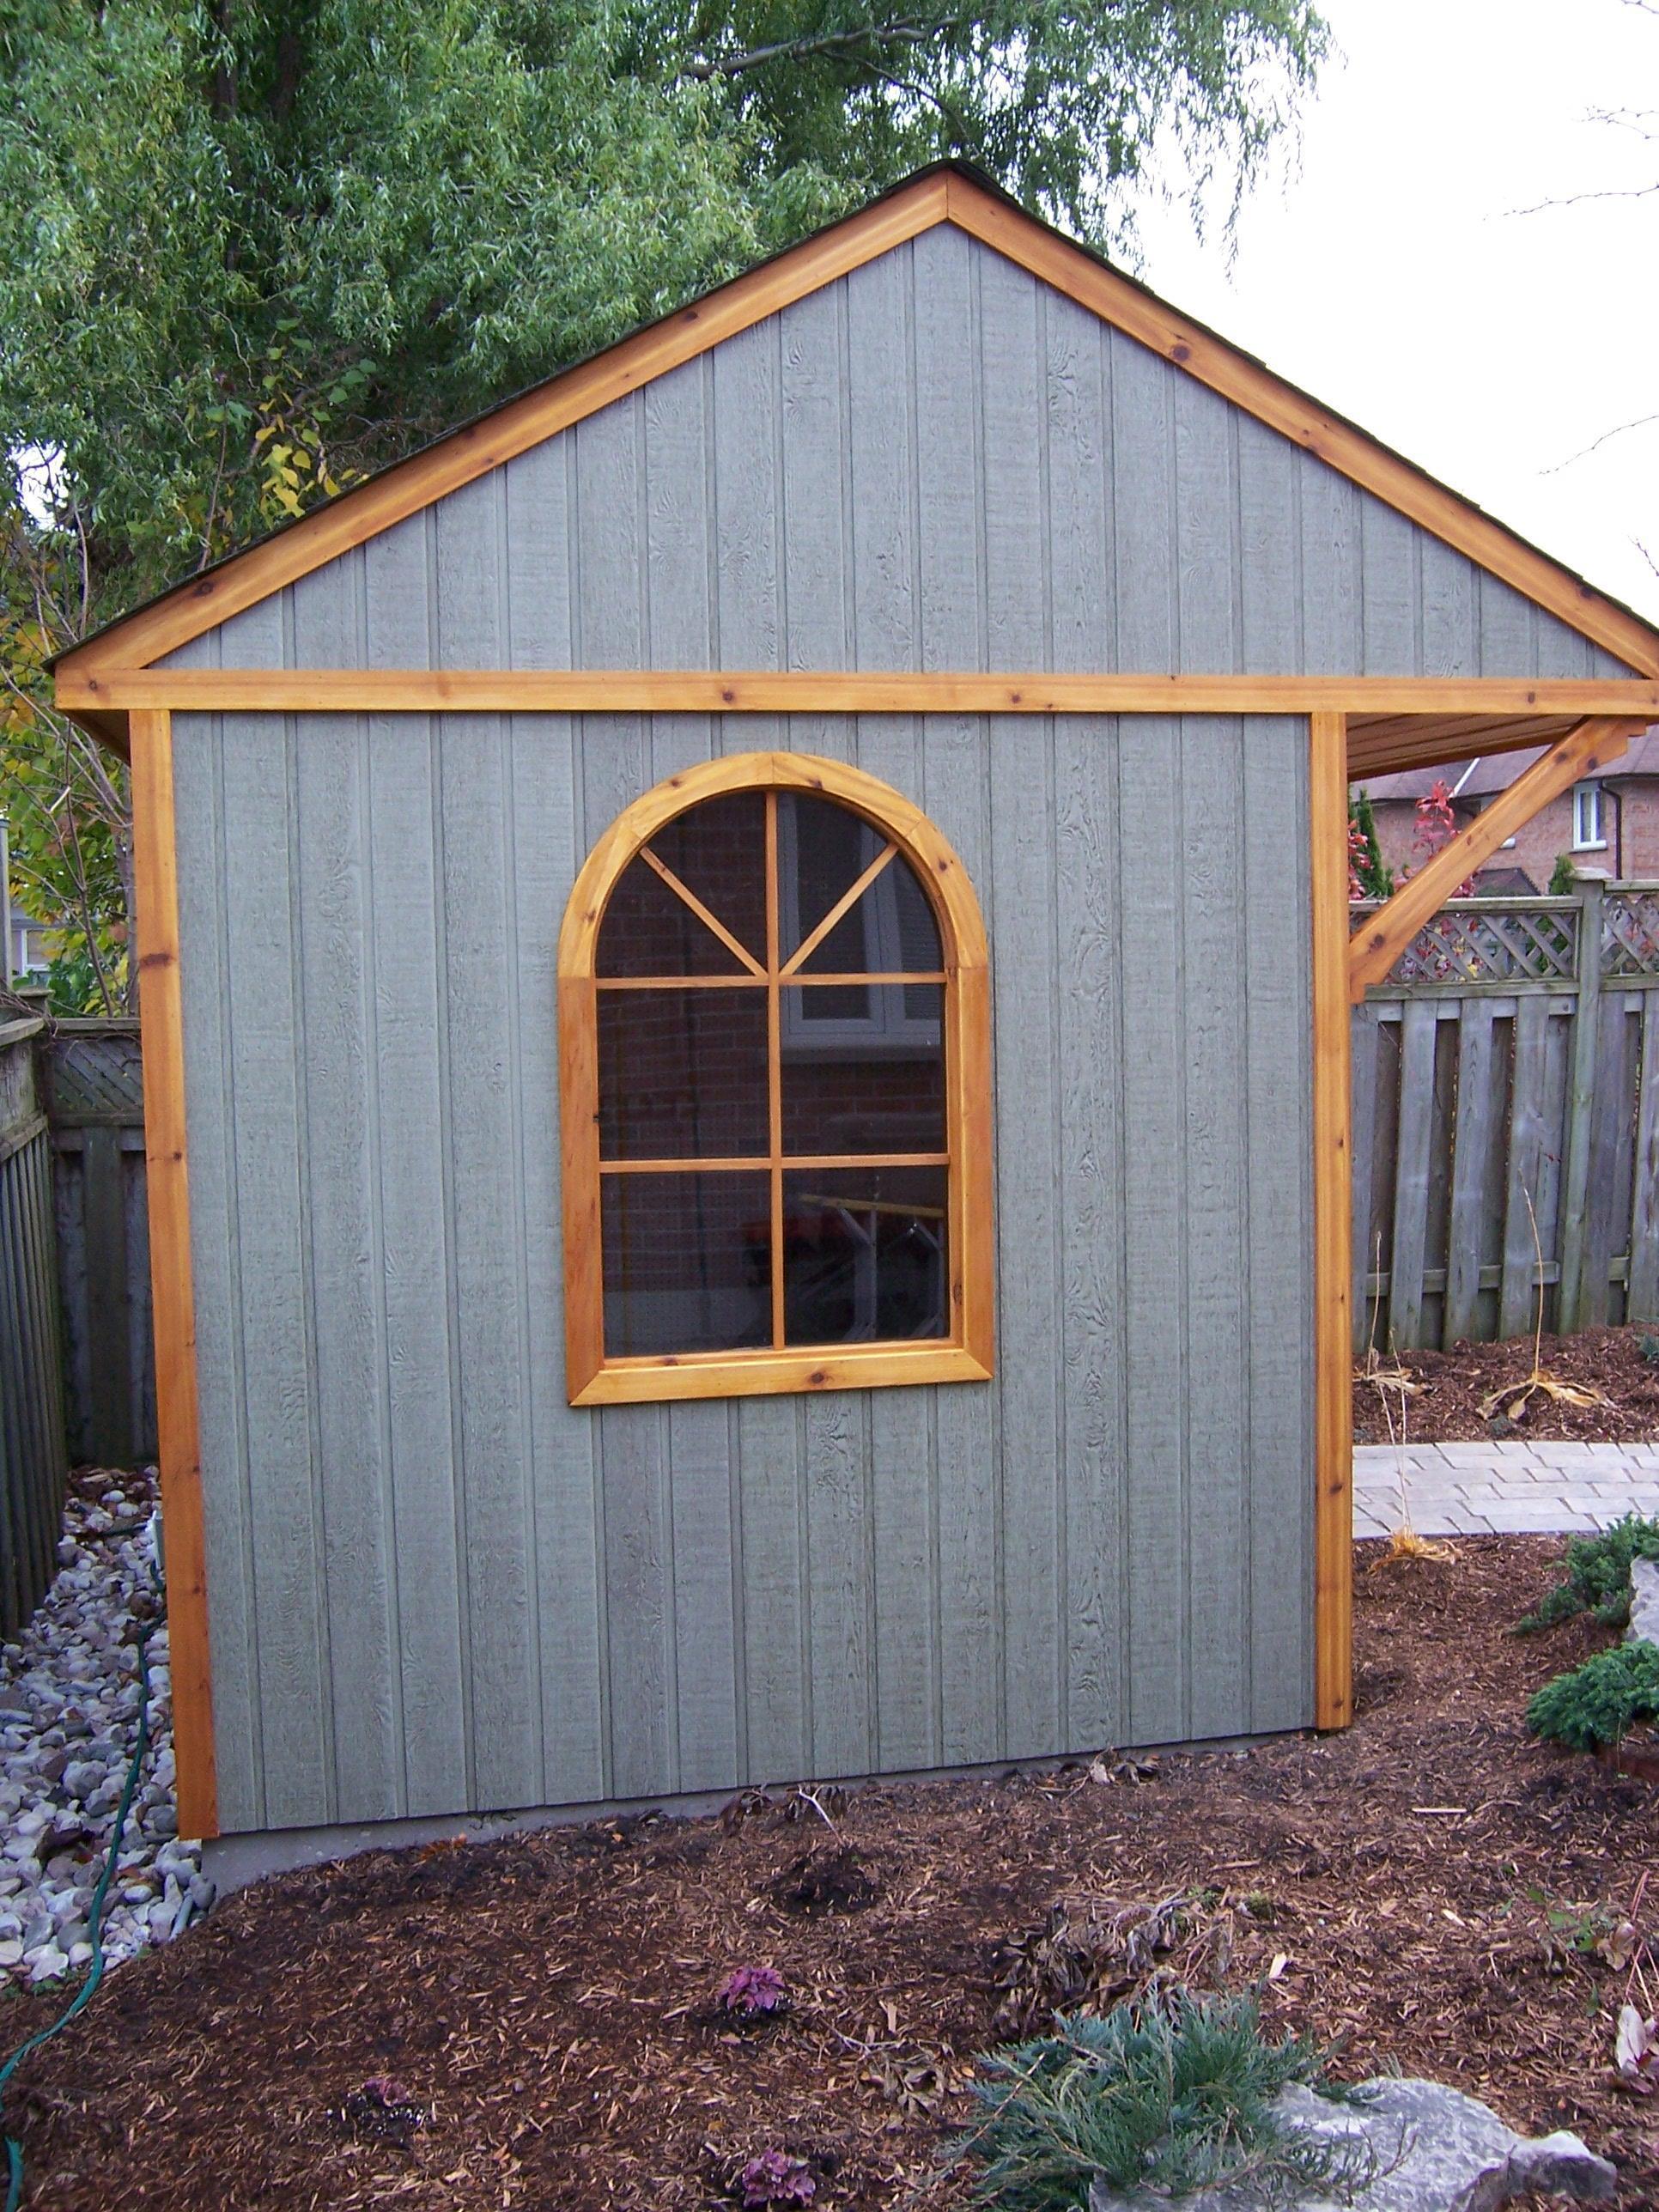 Canexel Glen Echo garden shed with bar window in Toronto Ontario. ID number 185988-4